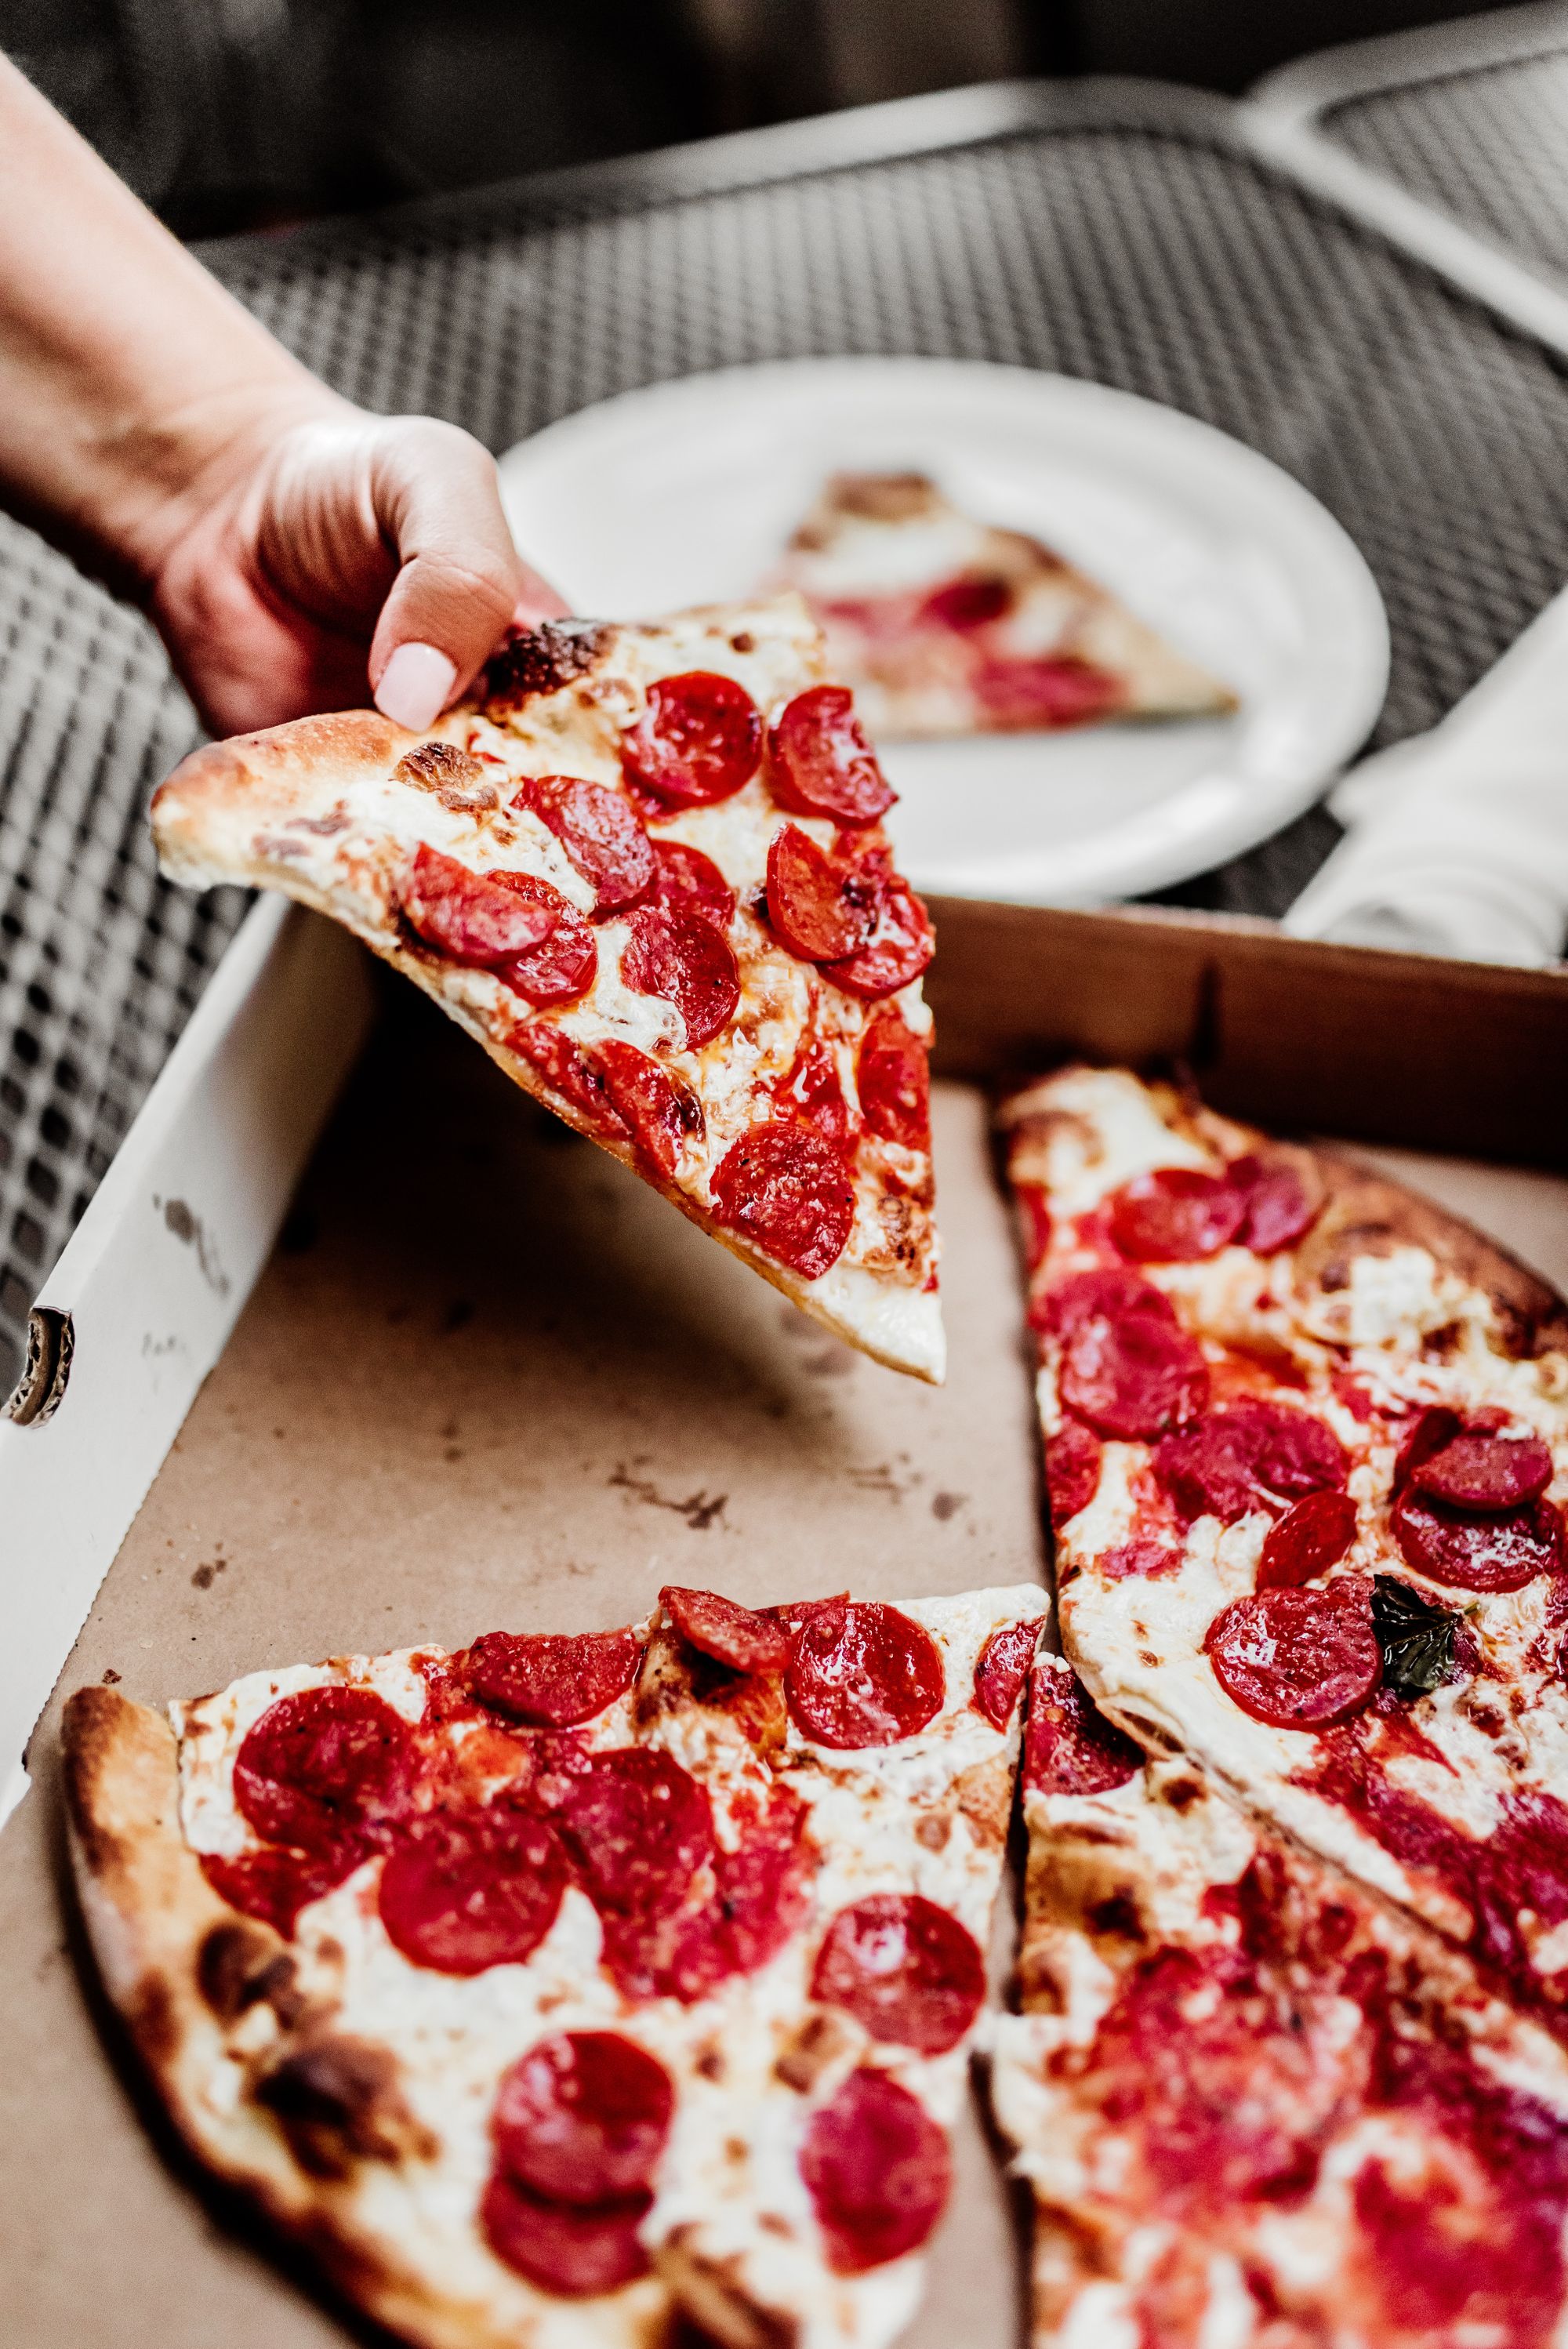 All about Global Recycling Day - Domino's Pizza Blog